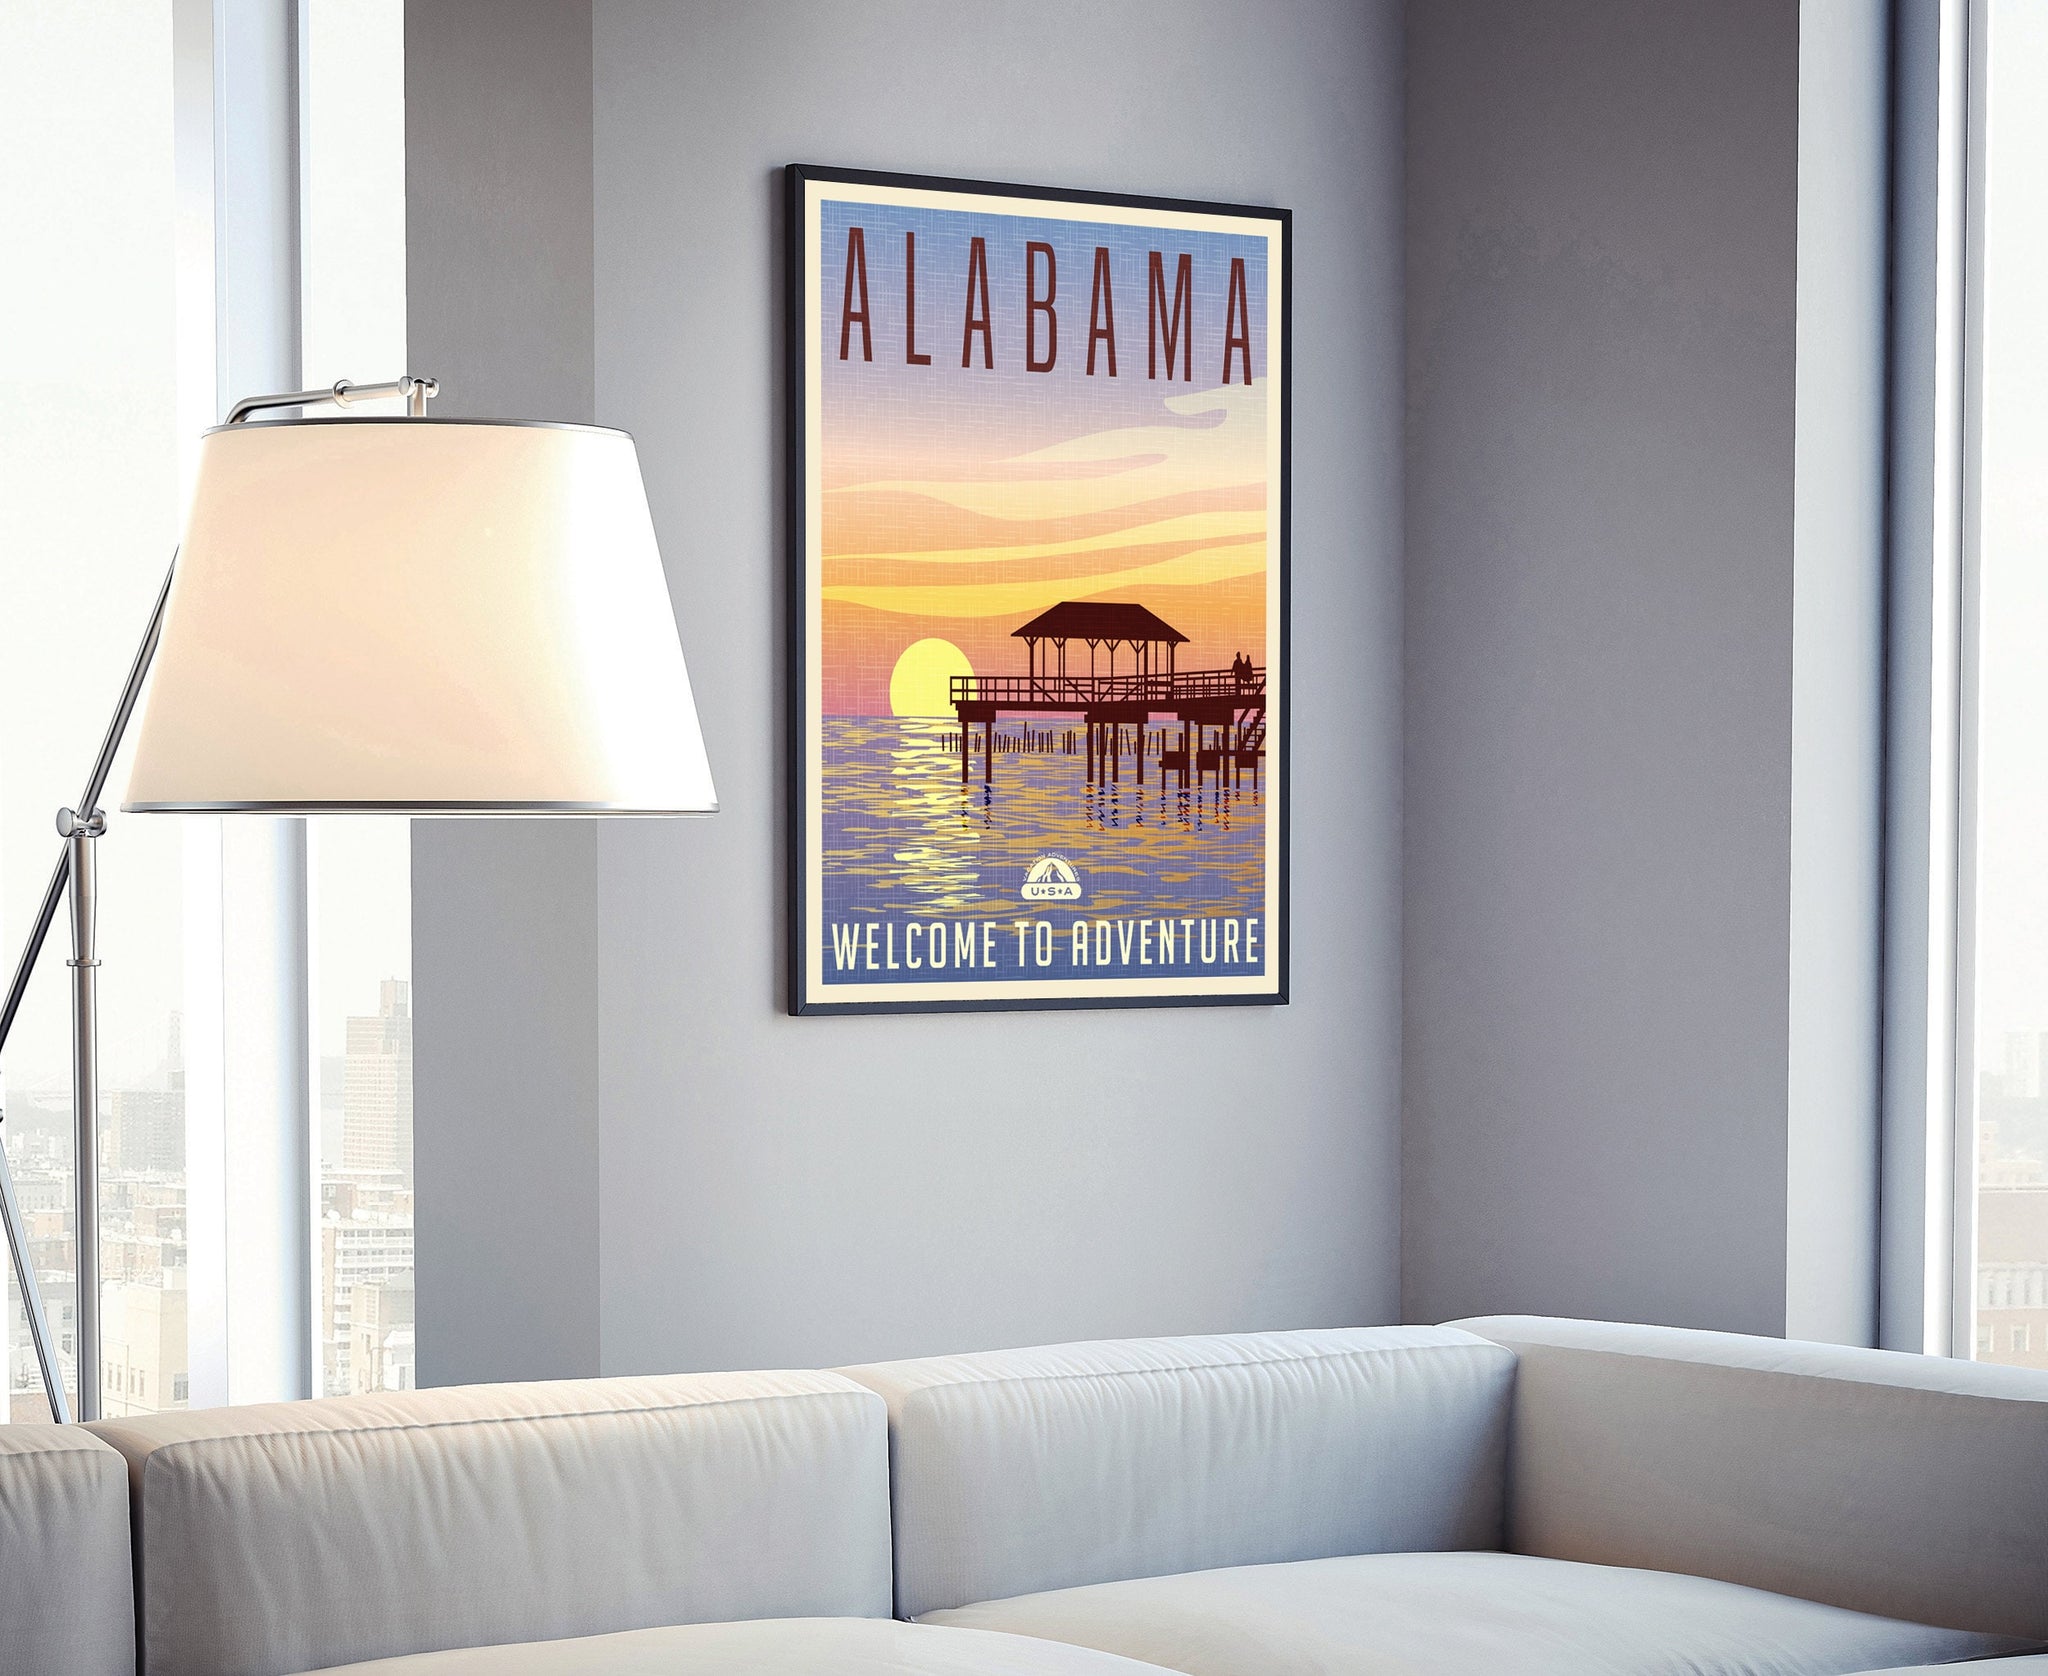 Retro Style Travel Poster, Alabama Vintage Rustic Poster Print, Home Wall Art, Office Wall Decor, Posters, Alabama, State Map Poster